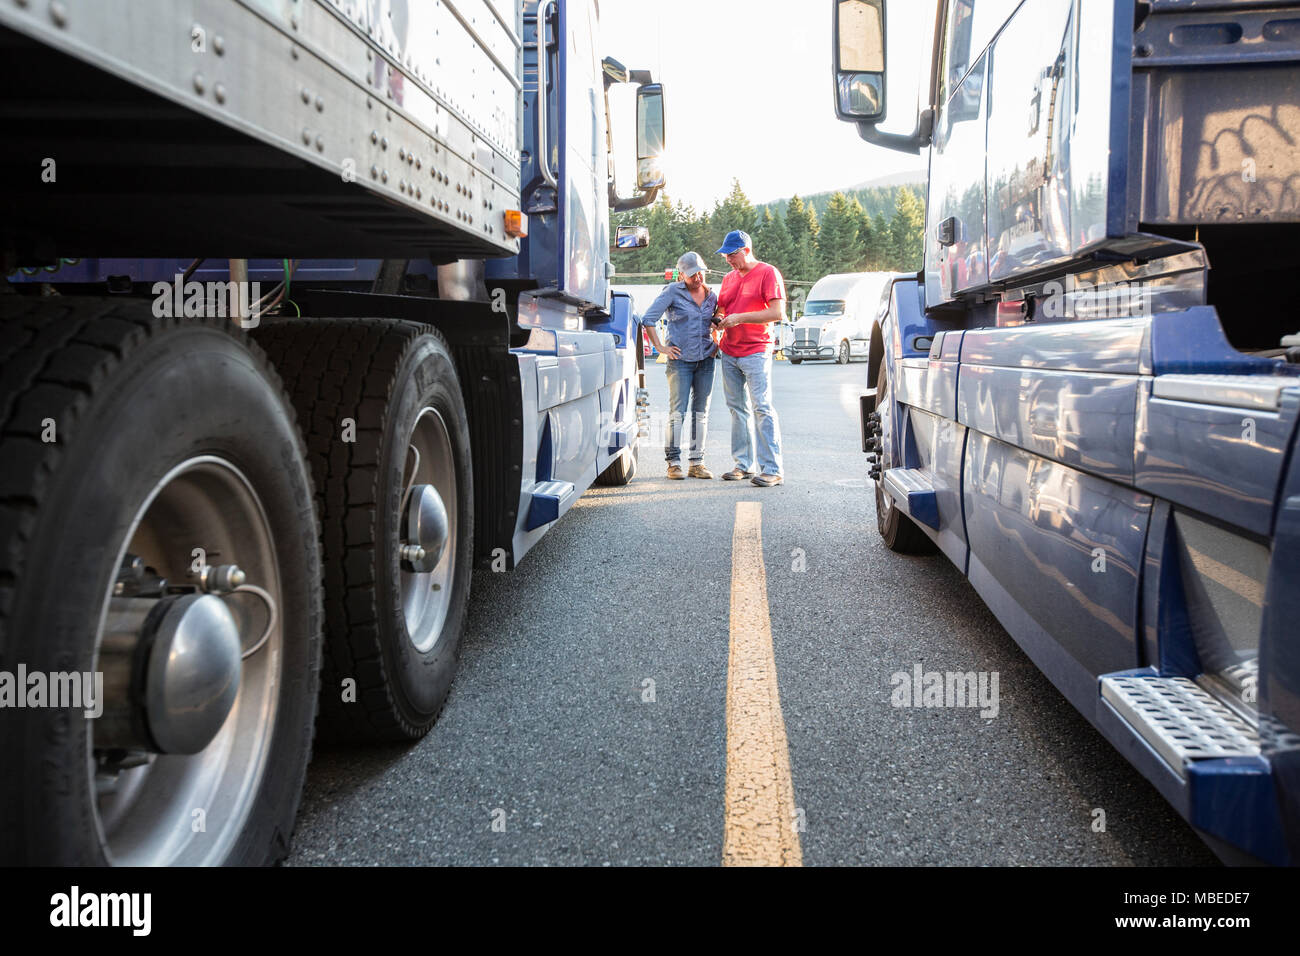 https://c8.alamy.com/comp/MBEDE7/caucasian-man-and-woman-truck-driving-team-going-over-data-on-a-cell-phone-while-standing-between-trucks-at-a-truck-stop-MBEDE7.jpg